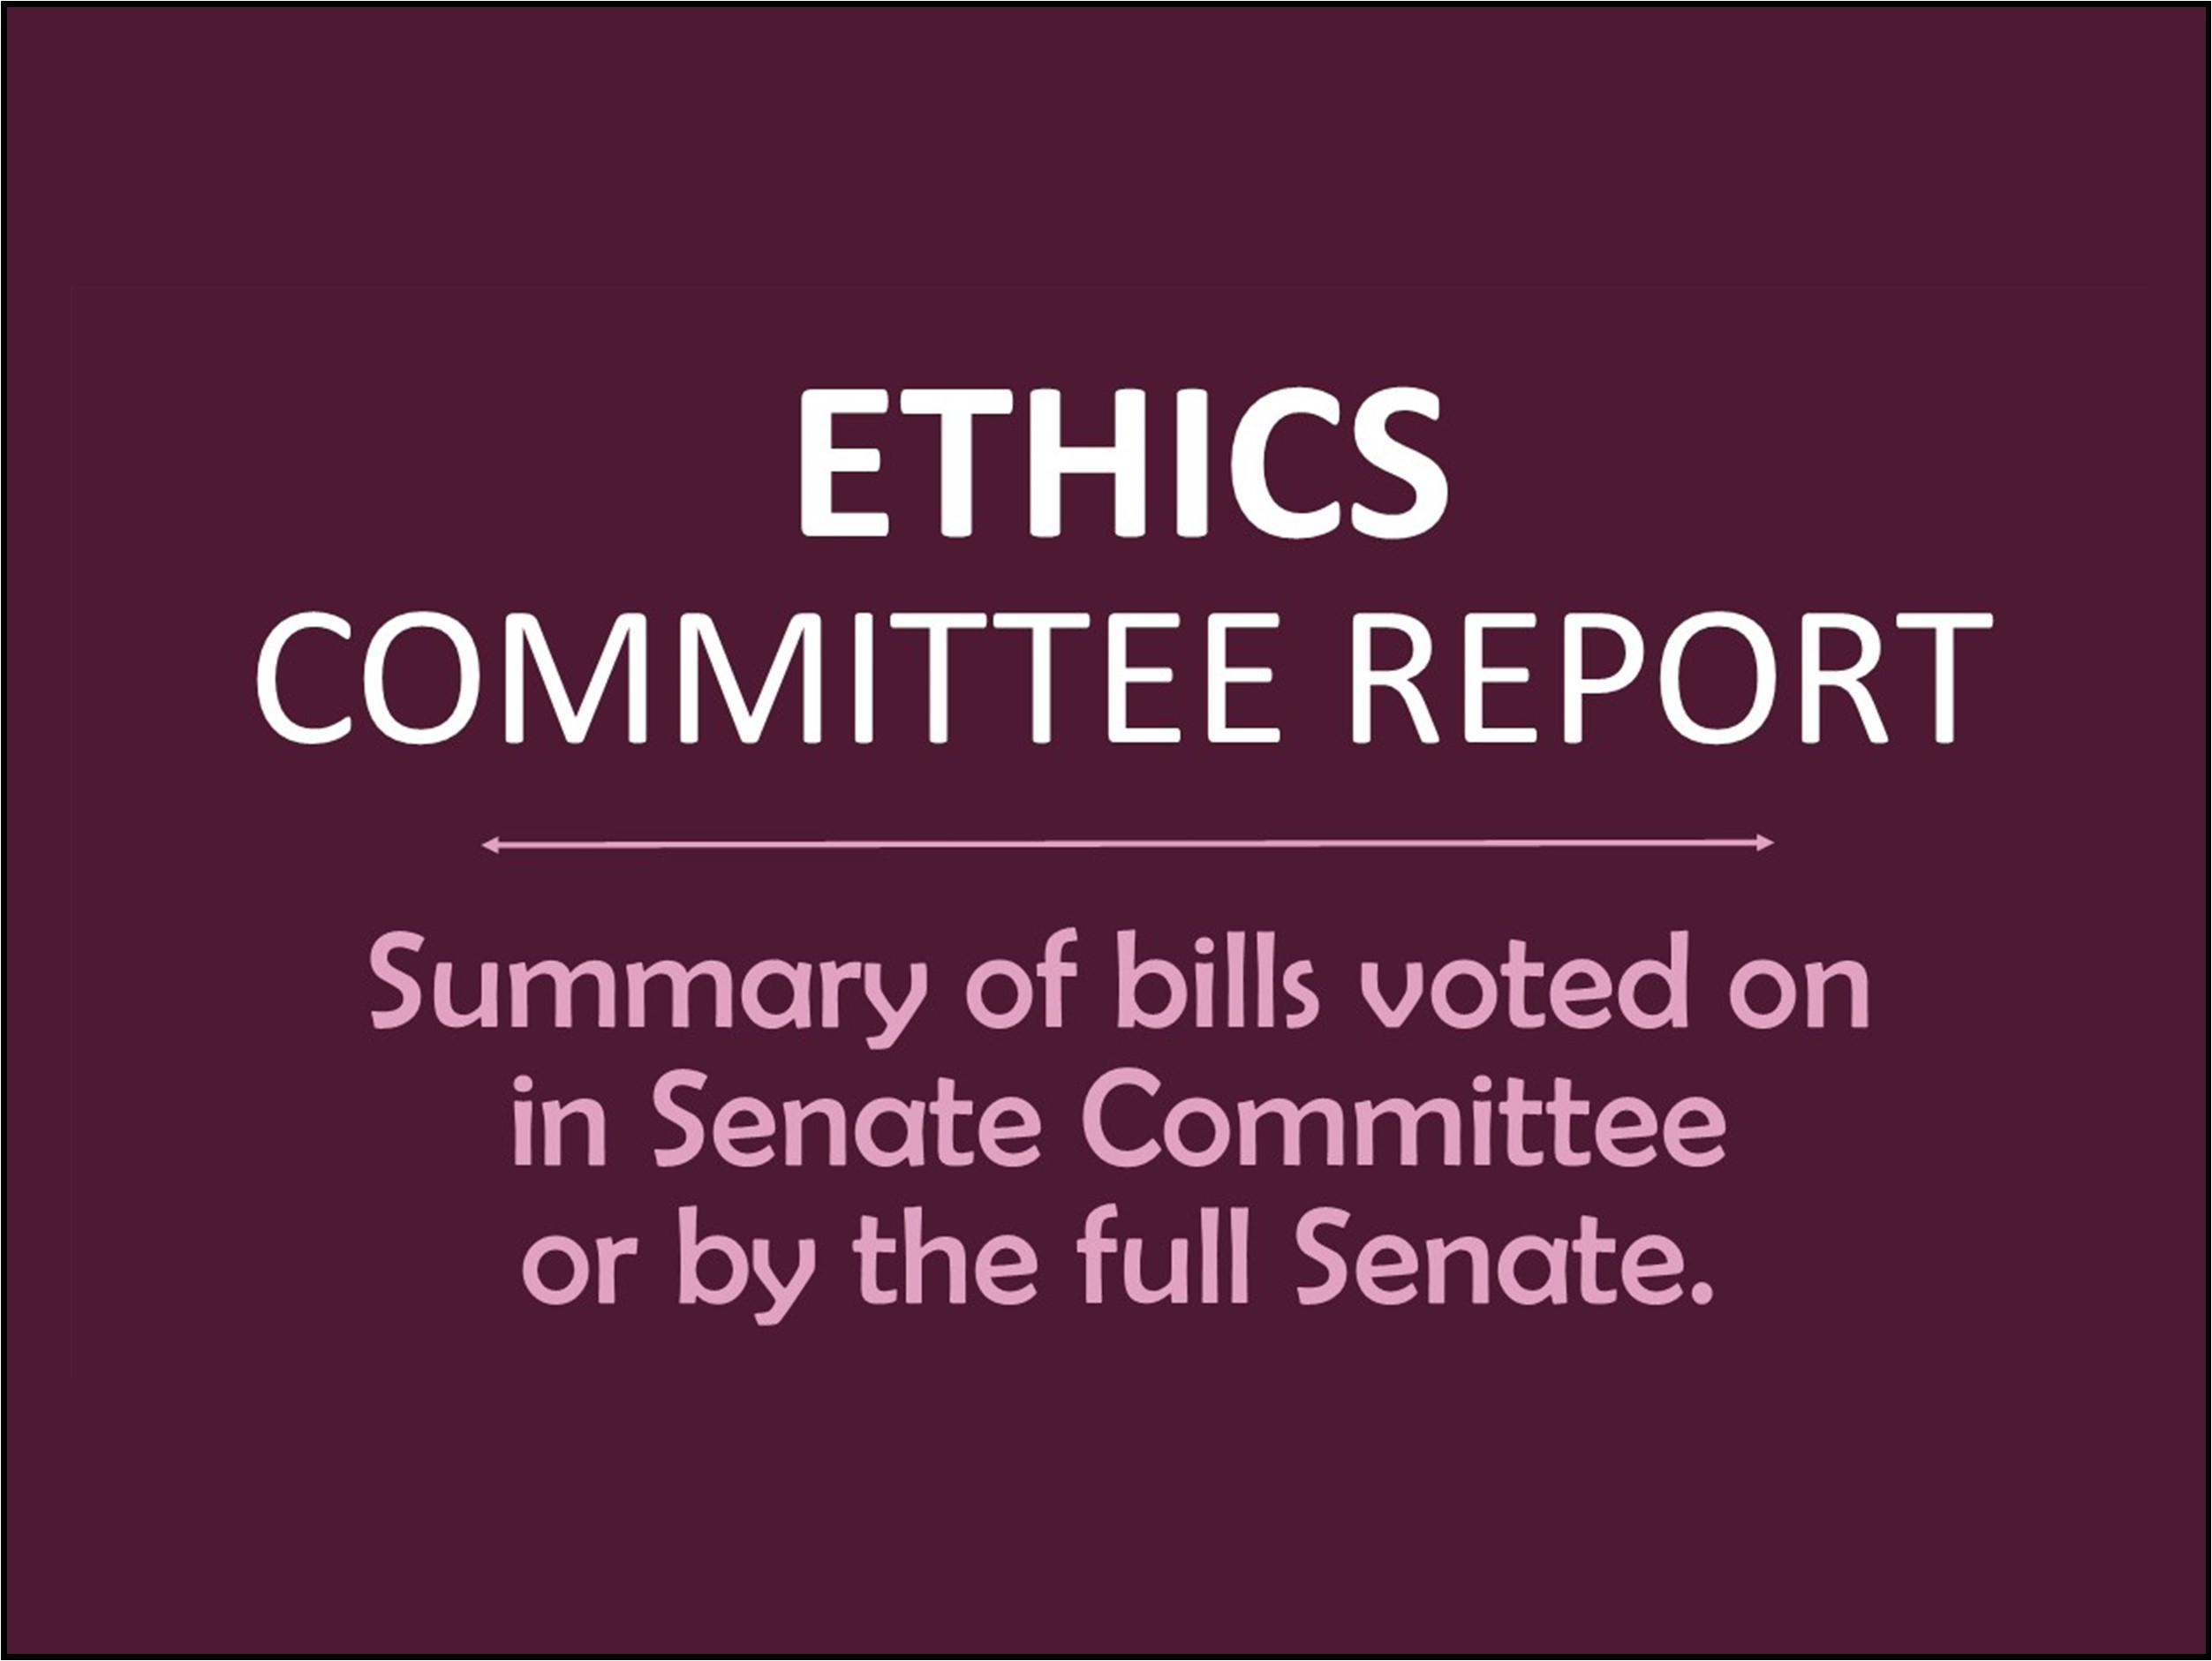 national research ethics committee bill